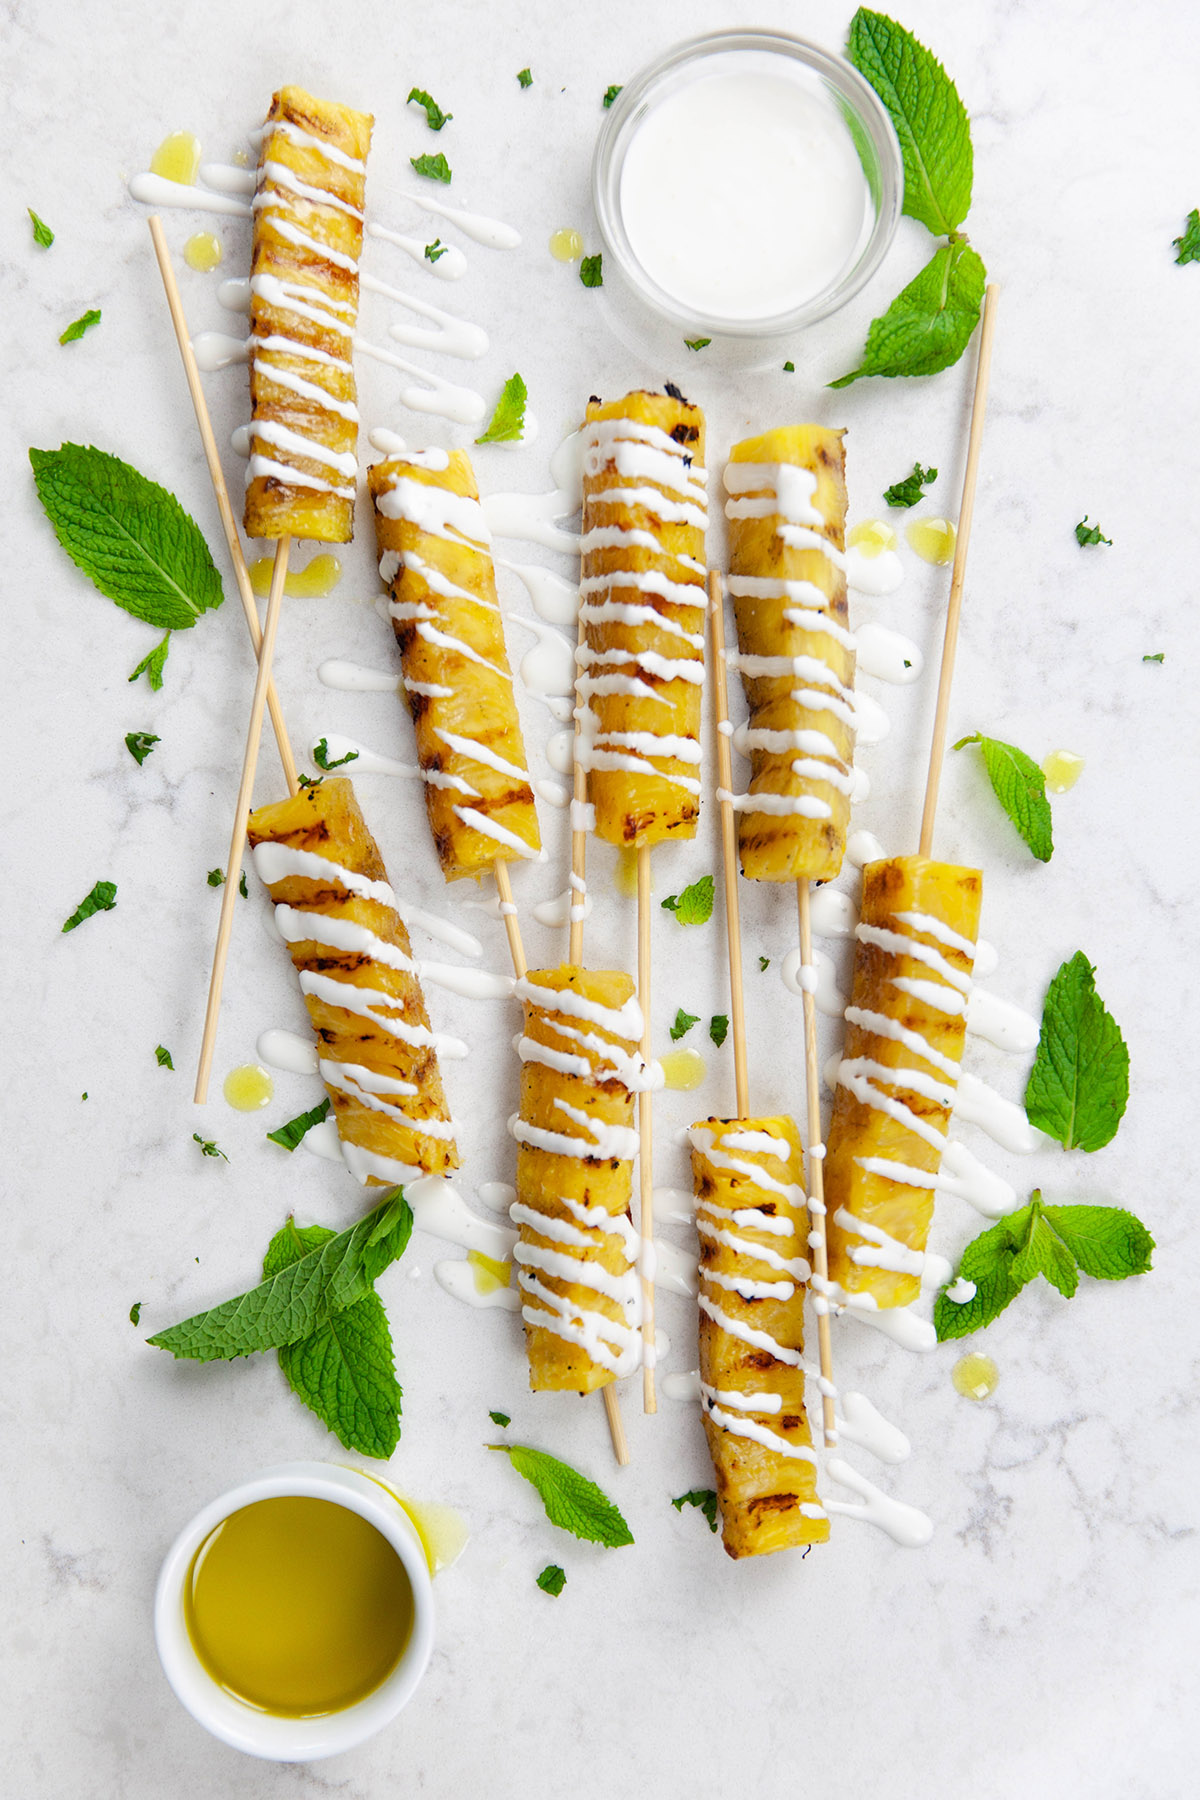 Grilled Pineapple with Coconut Rum Sauce